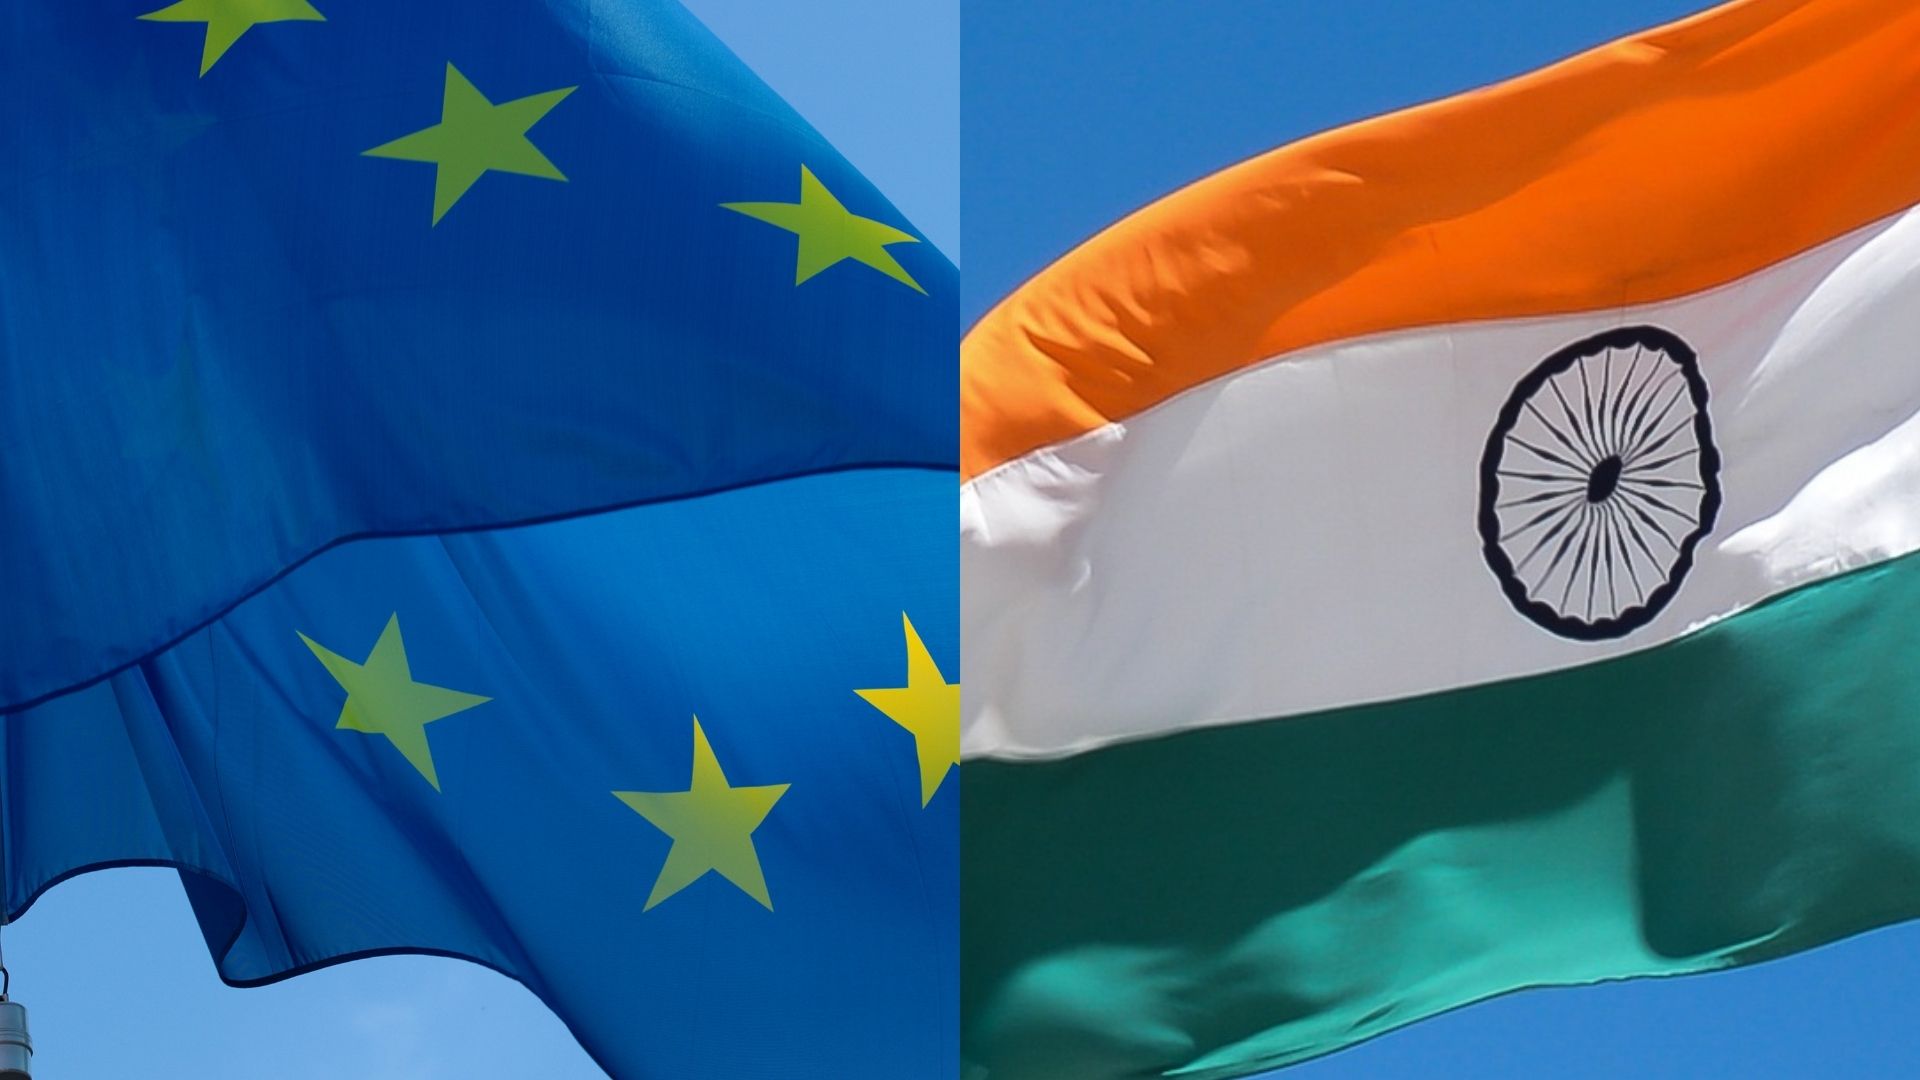 Christophe Jaffrelot writes: What the Indo-French relationship needs